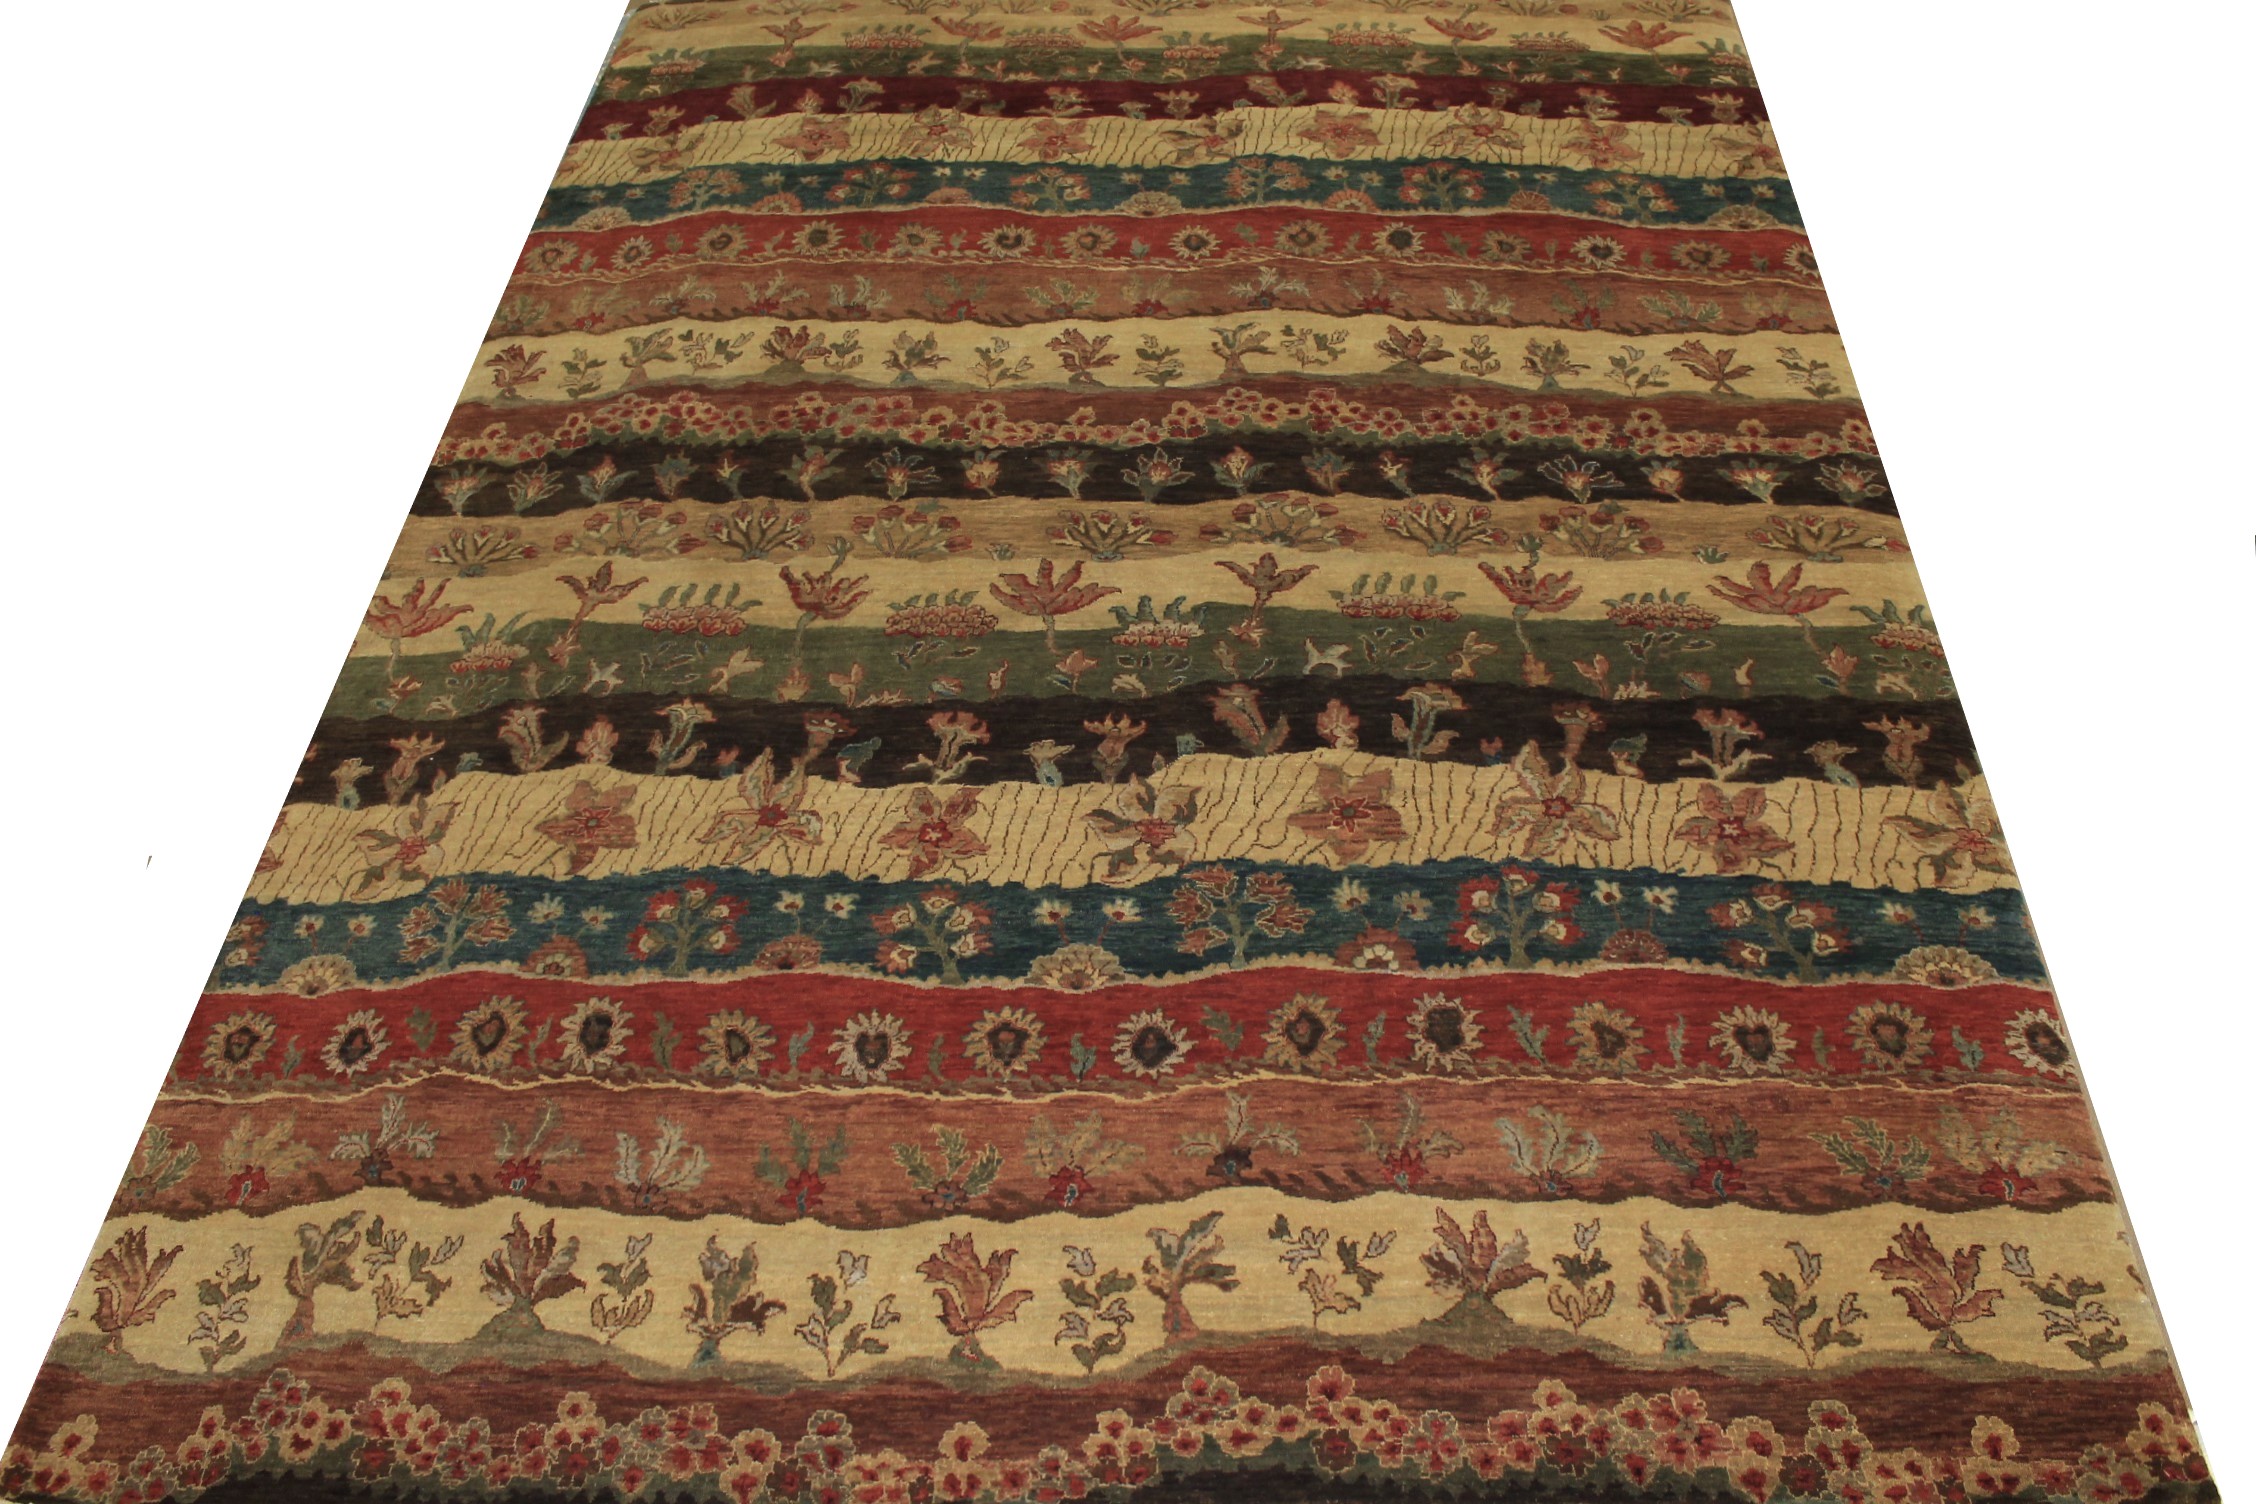 9x12 Aryana & Antique Revivals Hand Knotted Wool Area Rug - MR12903